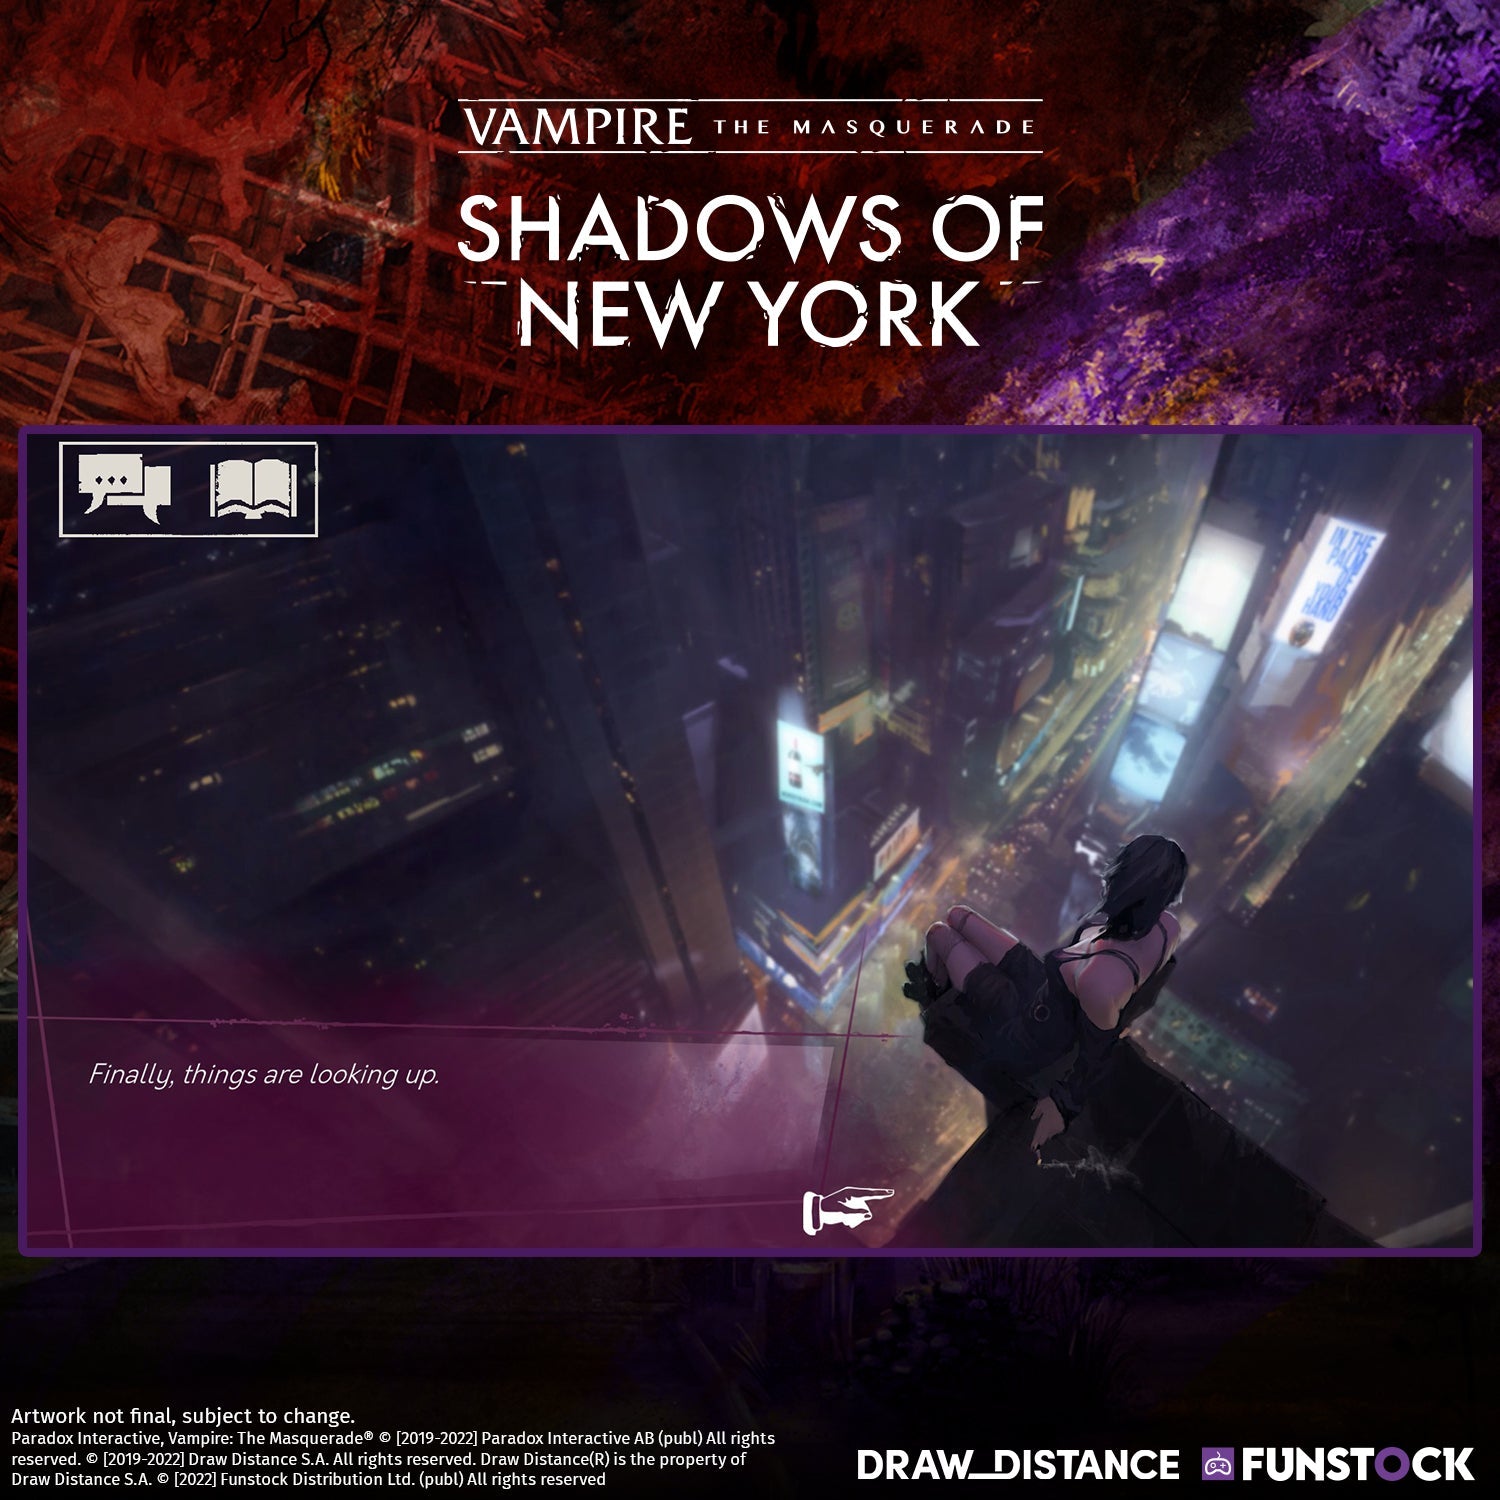 Vampire the Masquerade Coteries and Shadows of New York on PS4